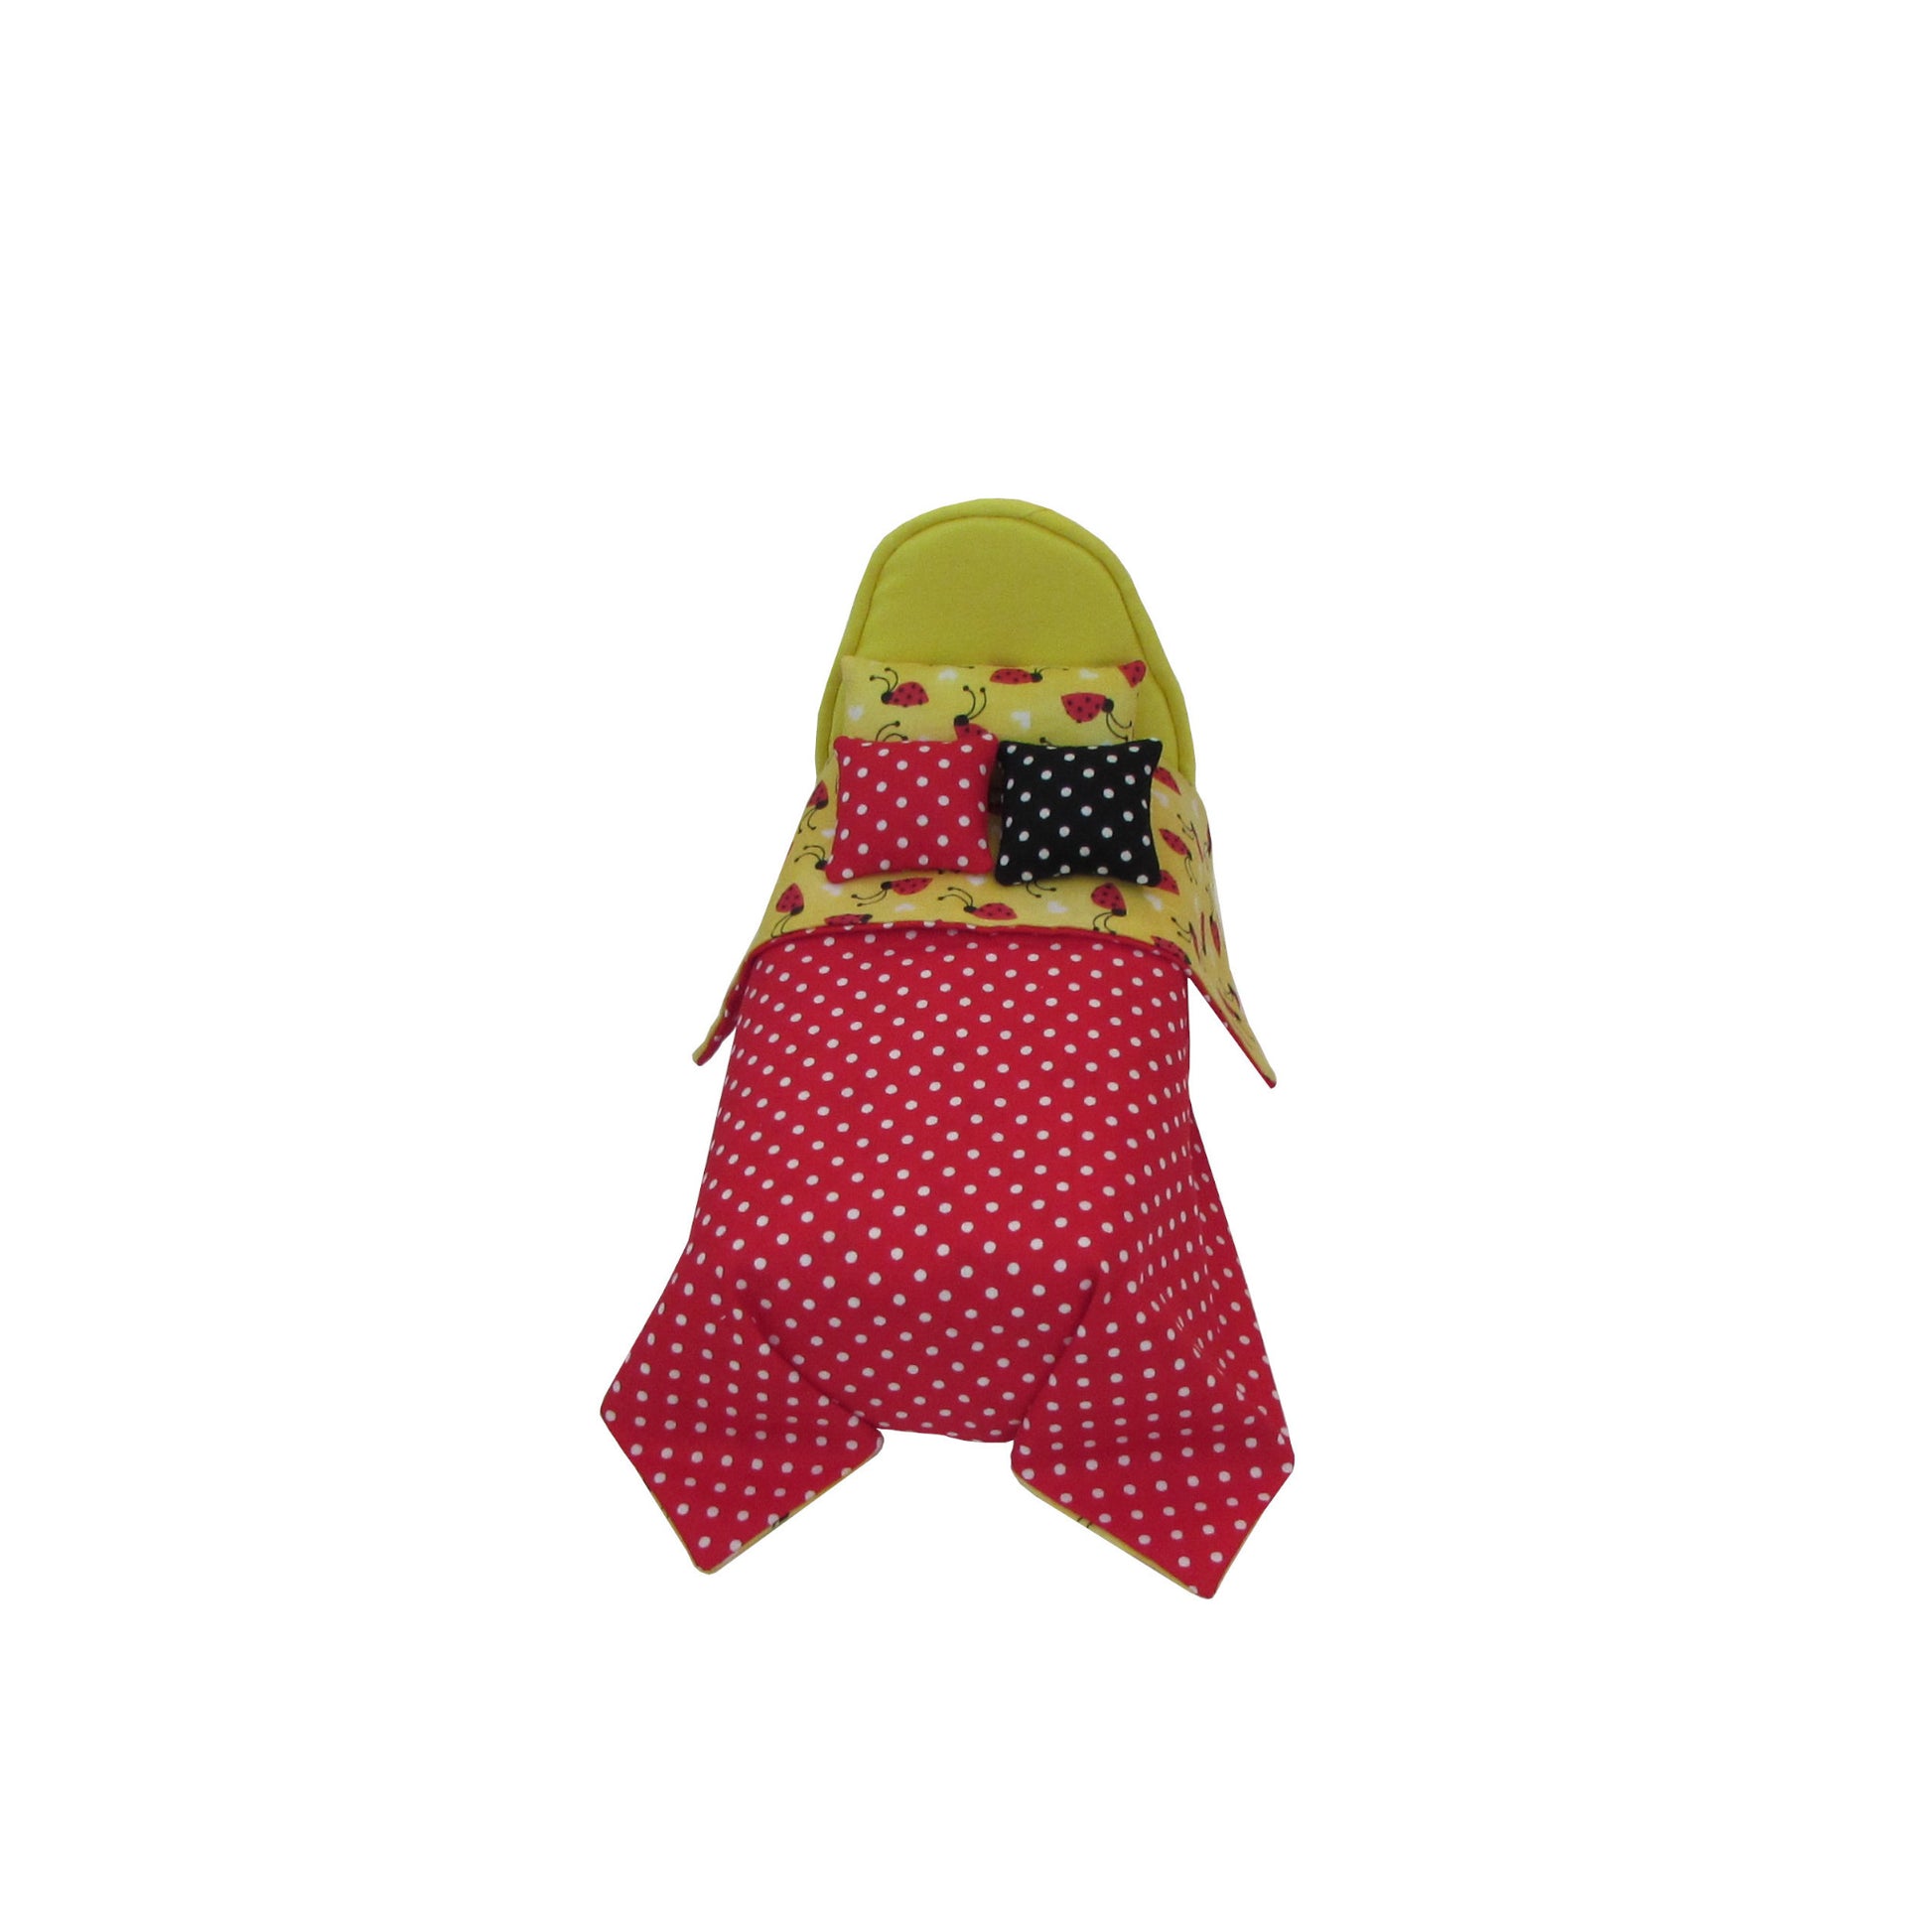 Bright Yellow Doll Bed and White Dots on Red Bedding for 6.5-inch dolls Second view